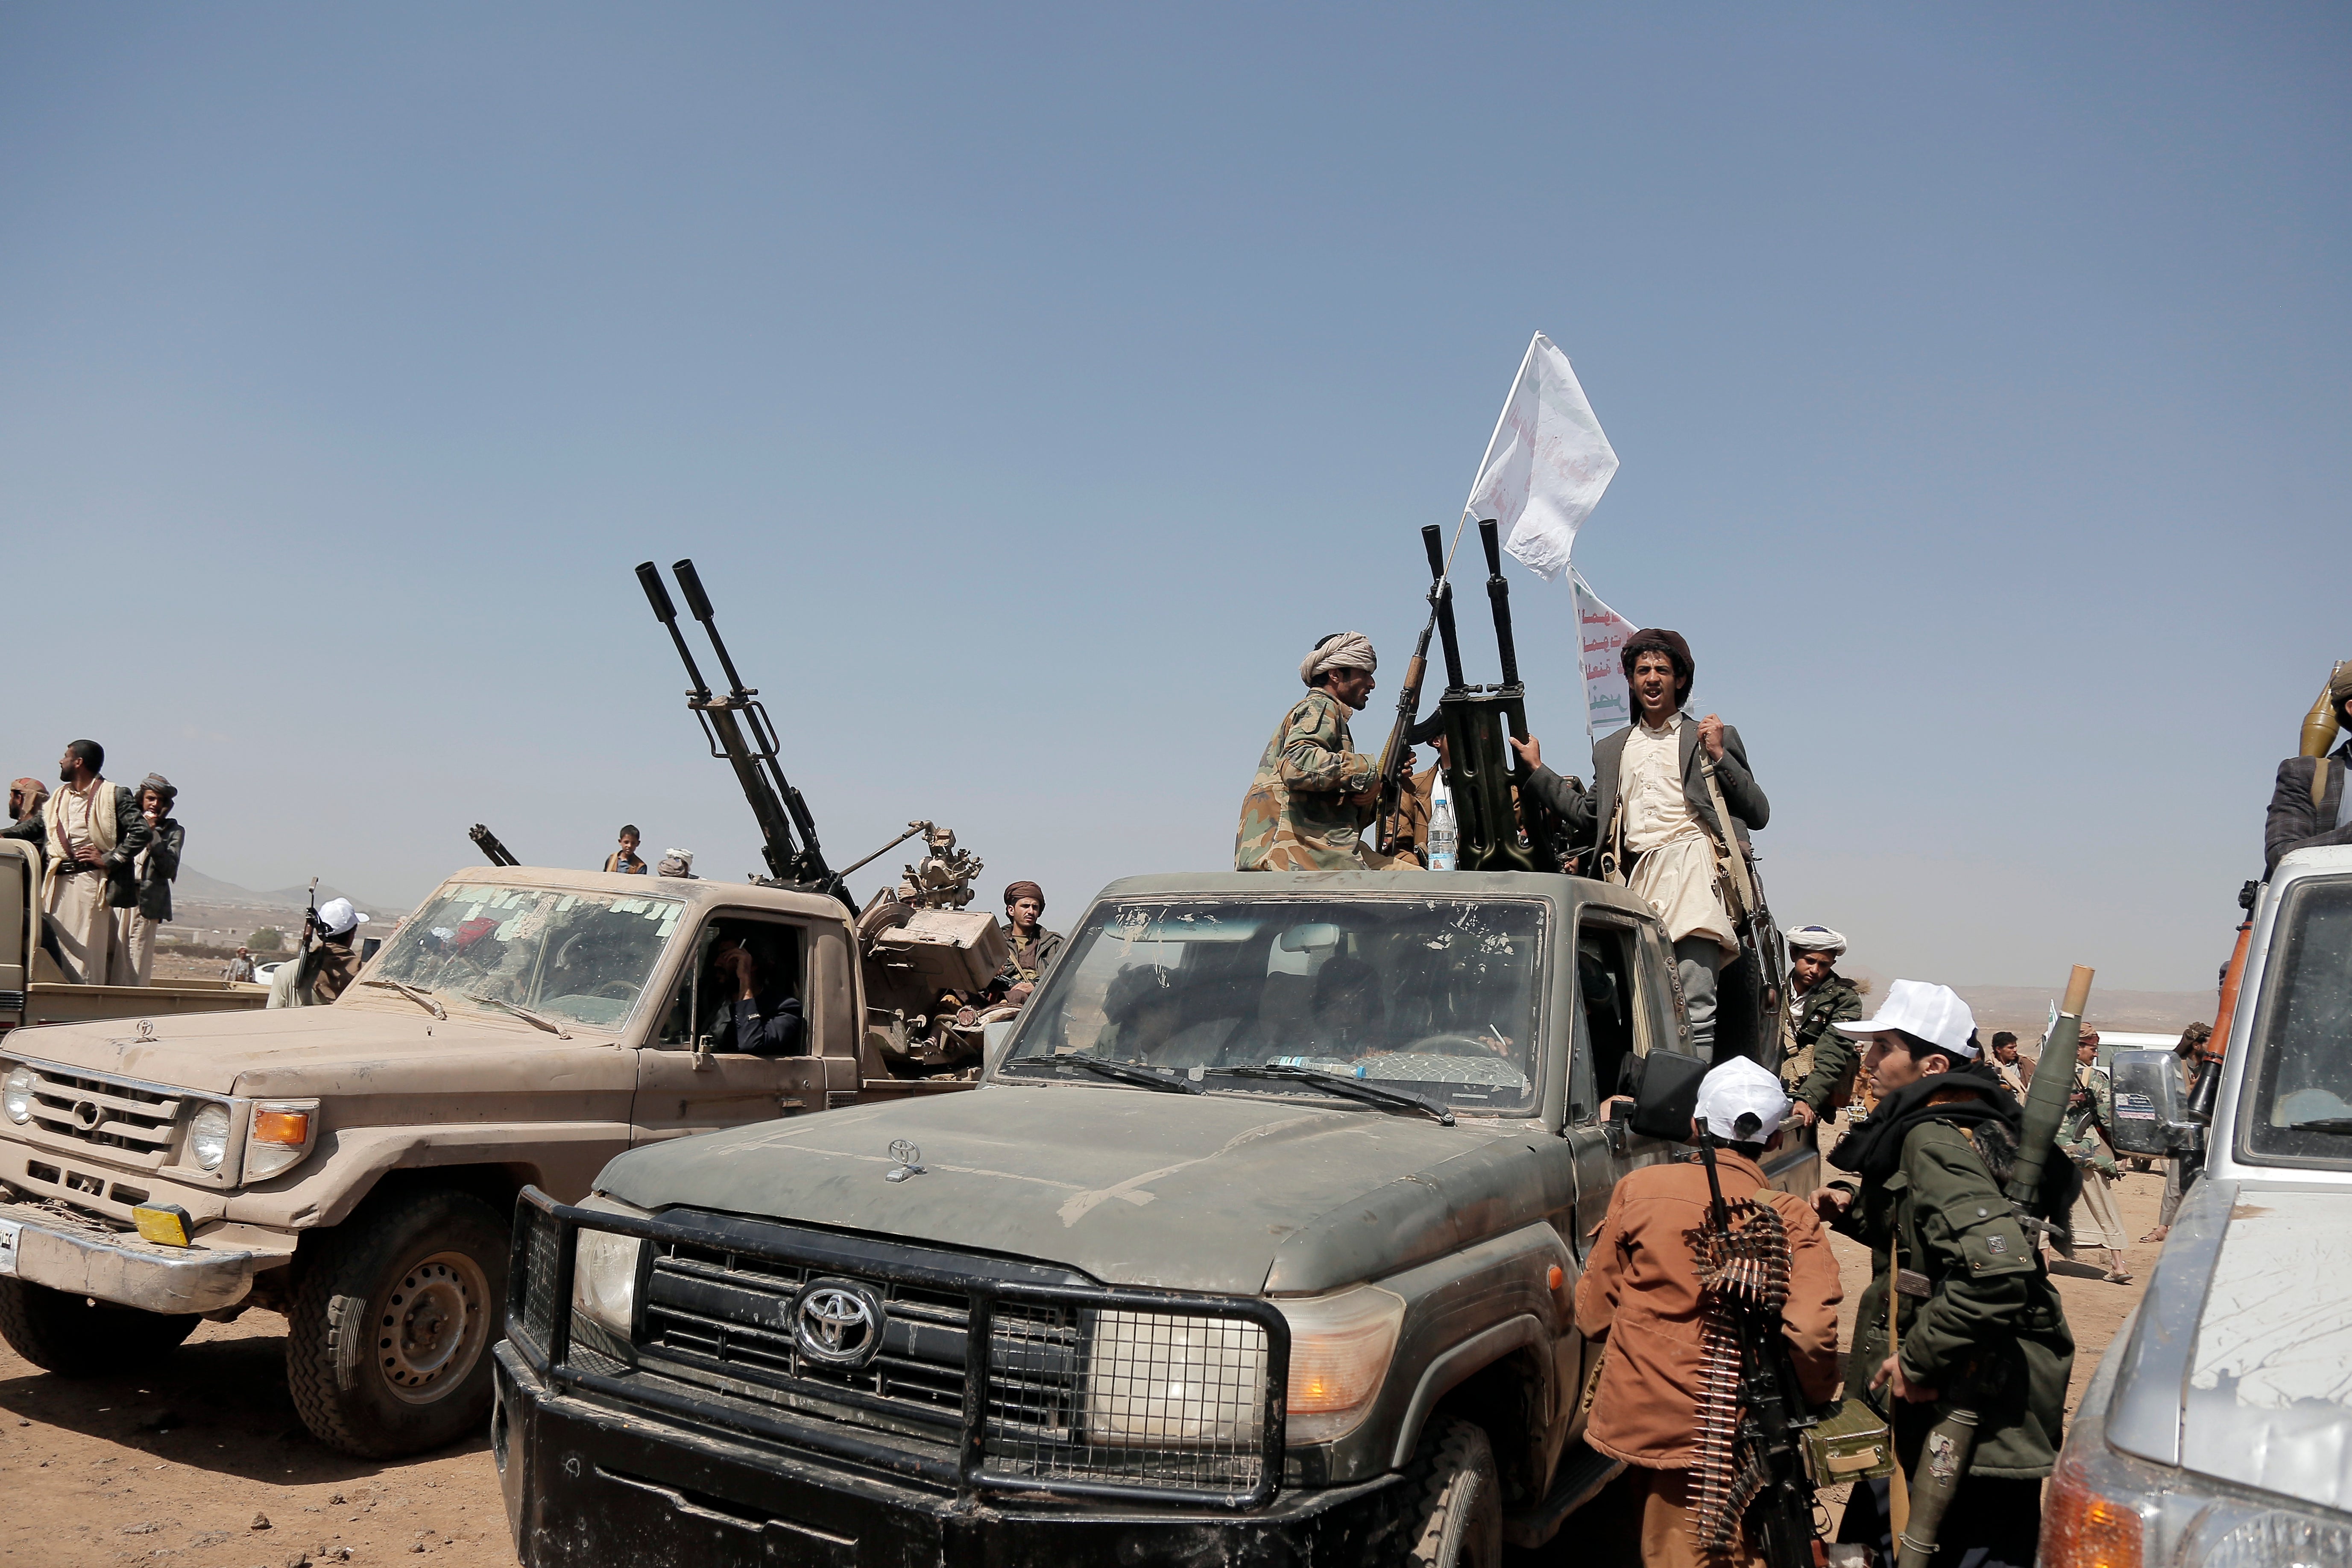 Houthi fighters man heavy machine guns mounted on vehicles at a rally in support of Palestinians in the Gaza